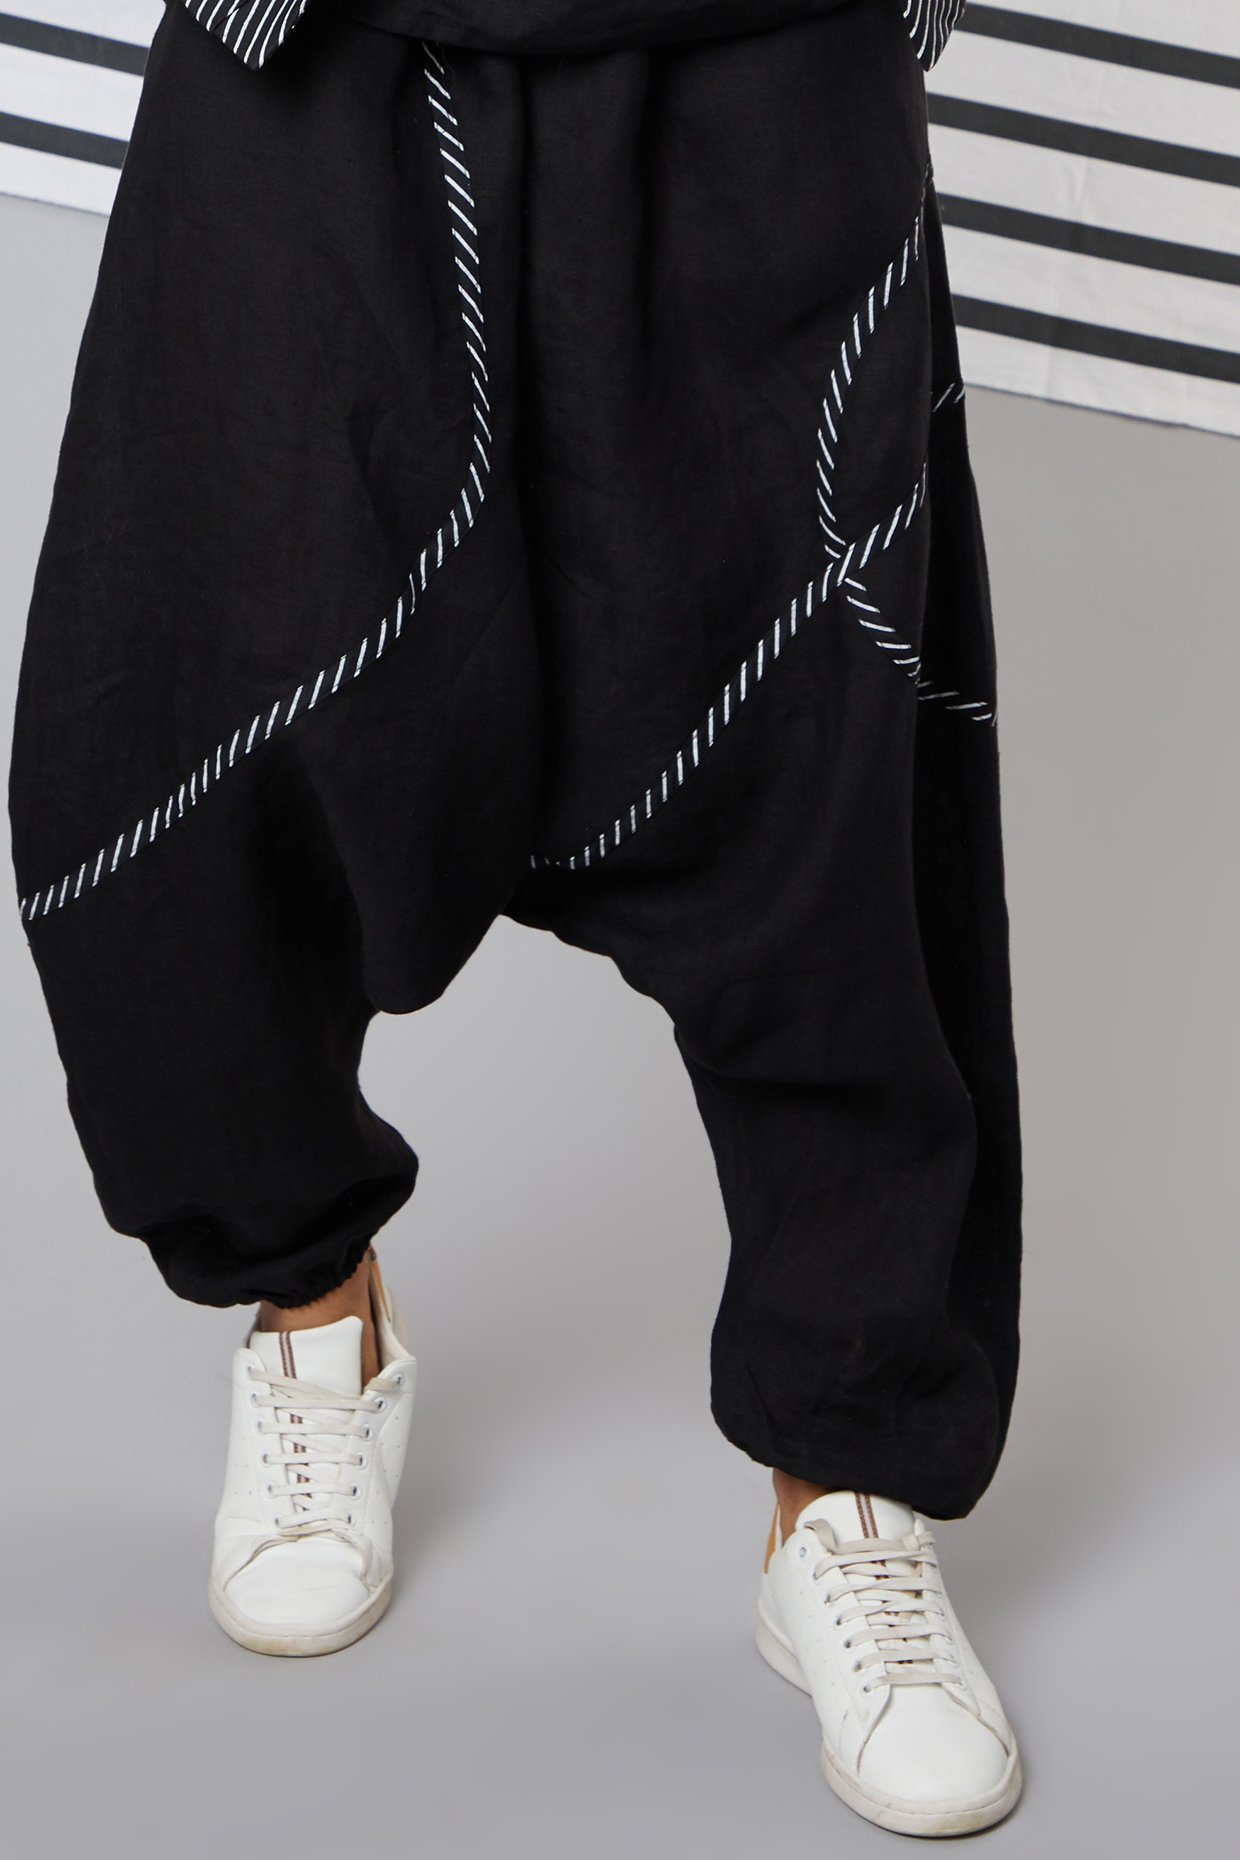 Shop Black Silk Dhoti Pants for Women Online from India's Luxury Designers  2023